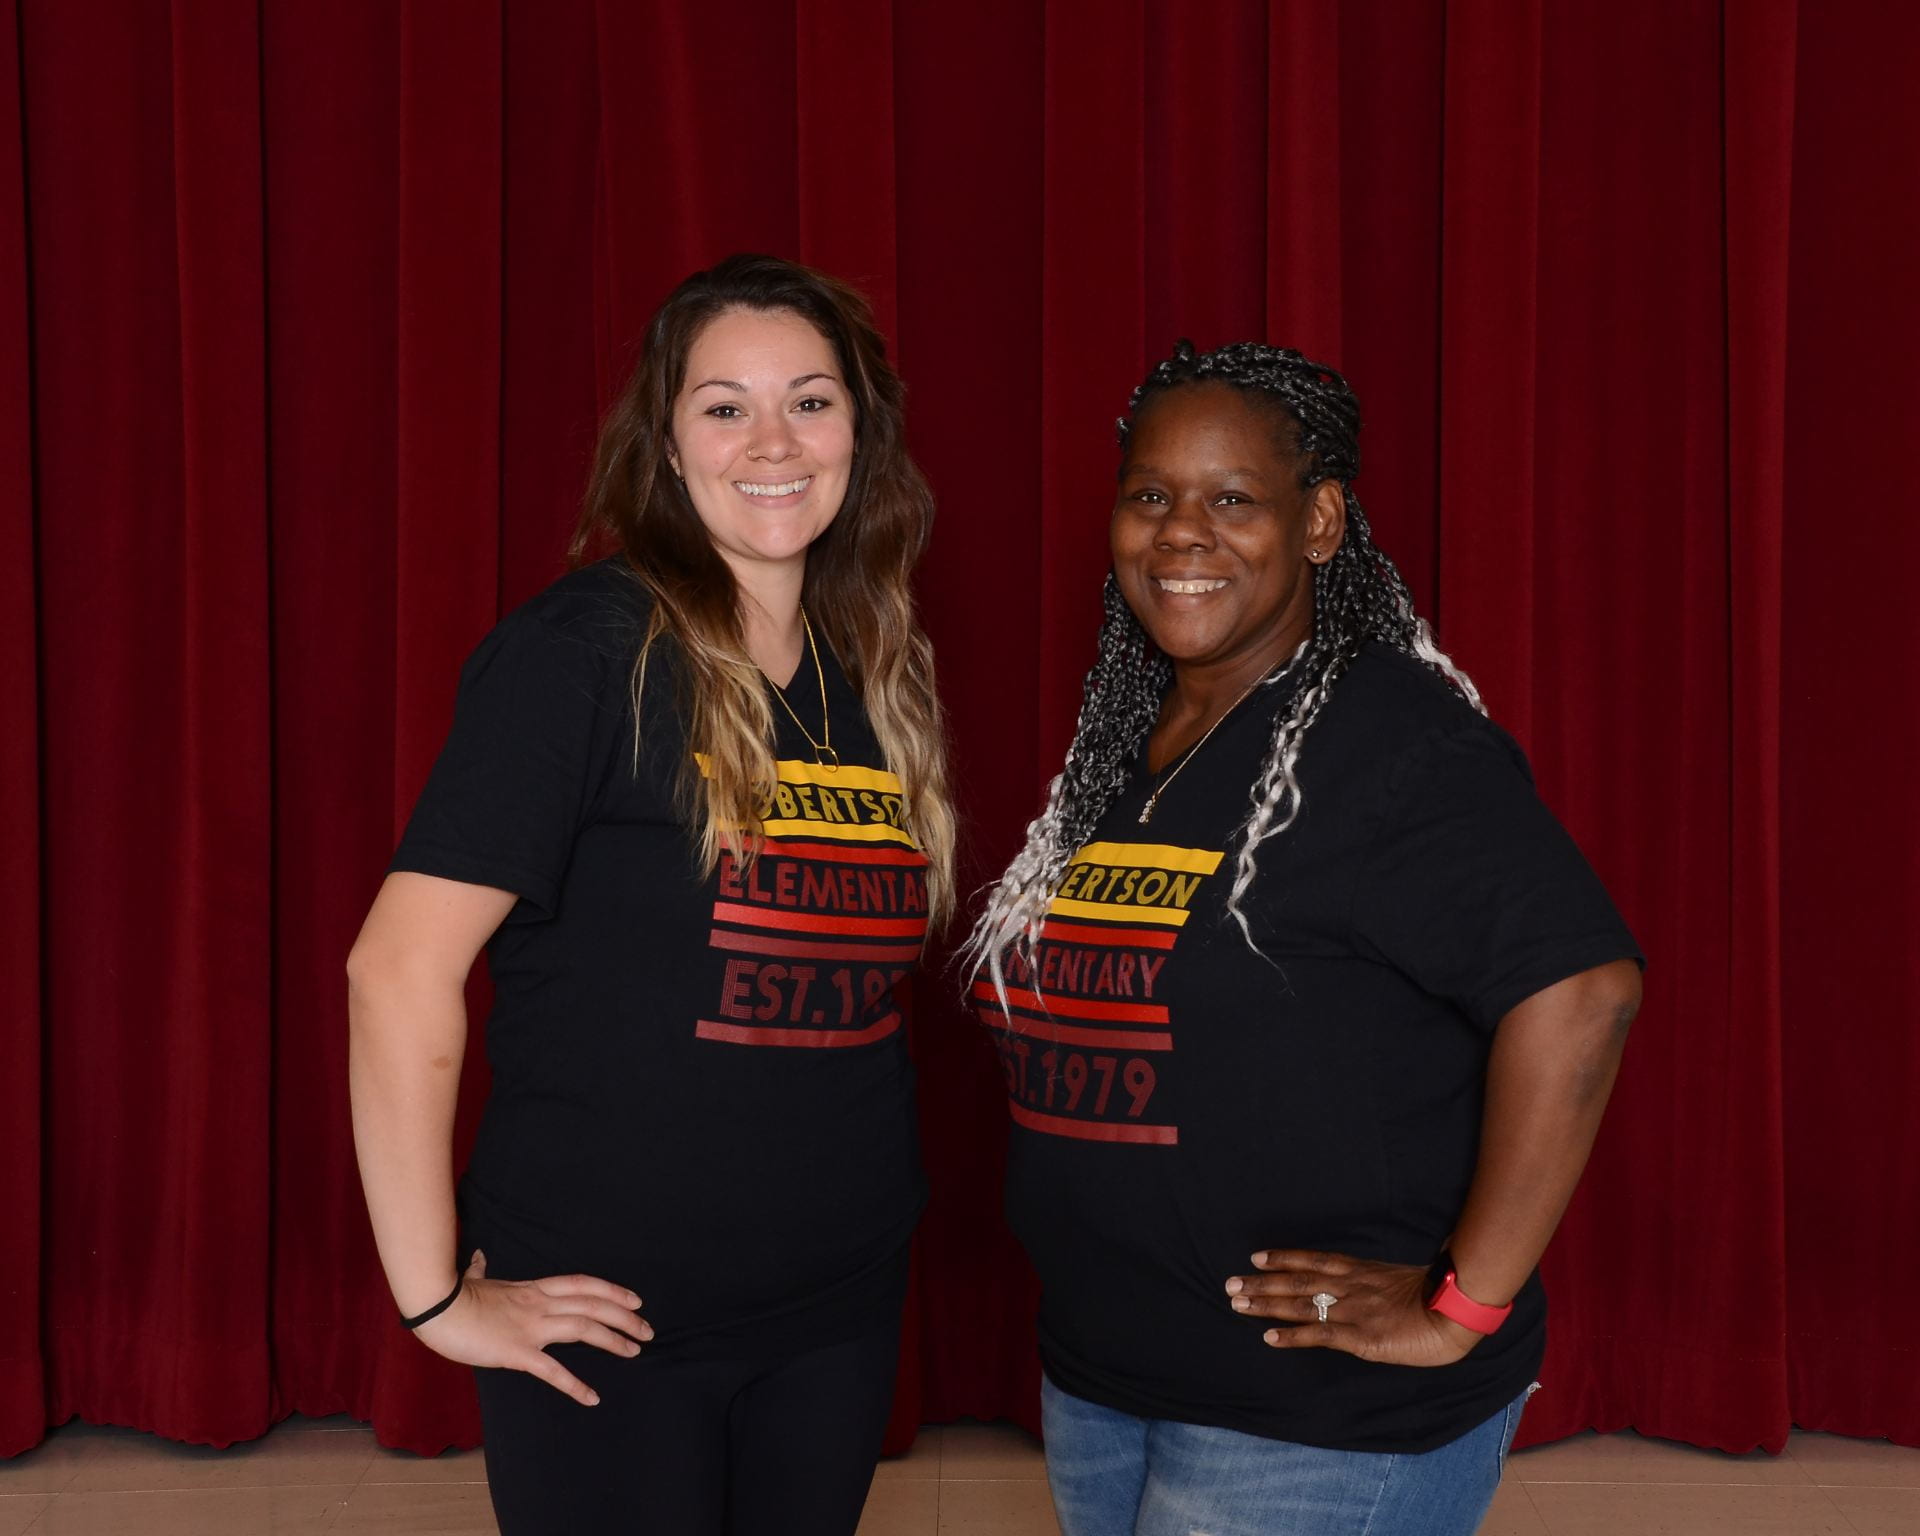 Two staff members wearing matching school shirts, stand in front of a dark background